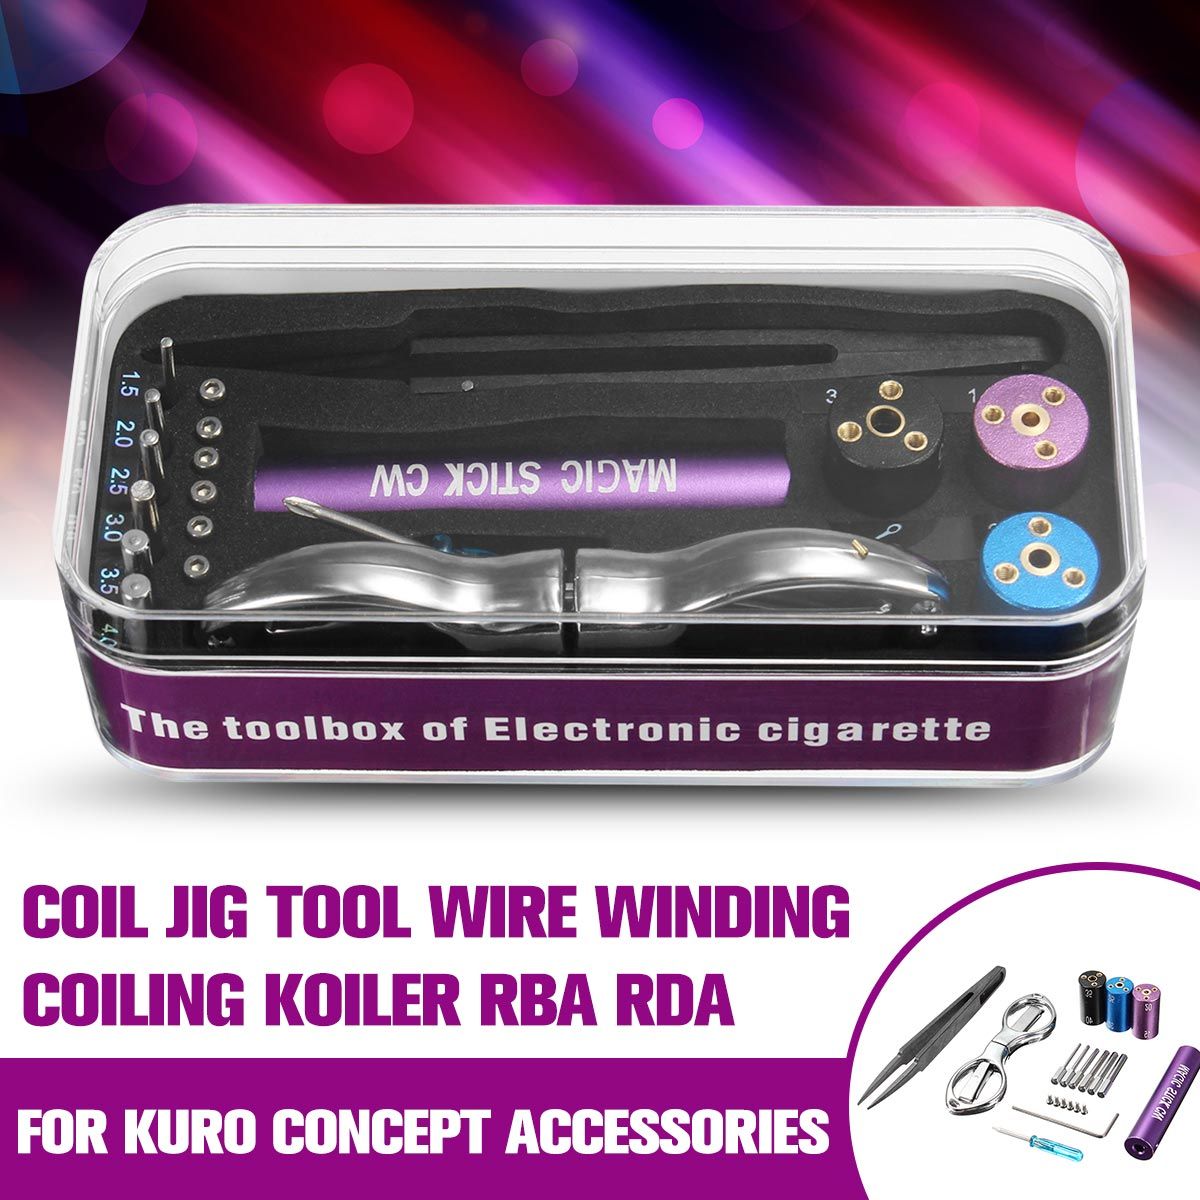 Atomizer-Coil-Jig-Tool-Wire-Winding-Coiling-Koiler-RBA-RDA-for-Kuro-Concept-Accessories-Motor-Wire-C-1285320